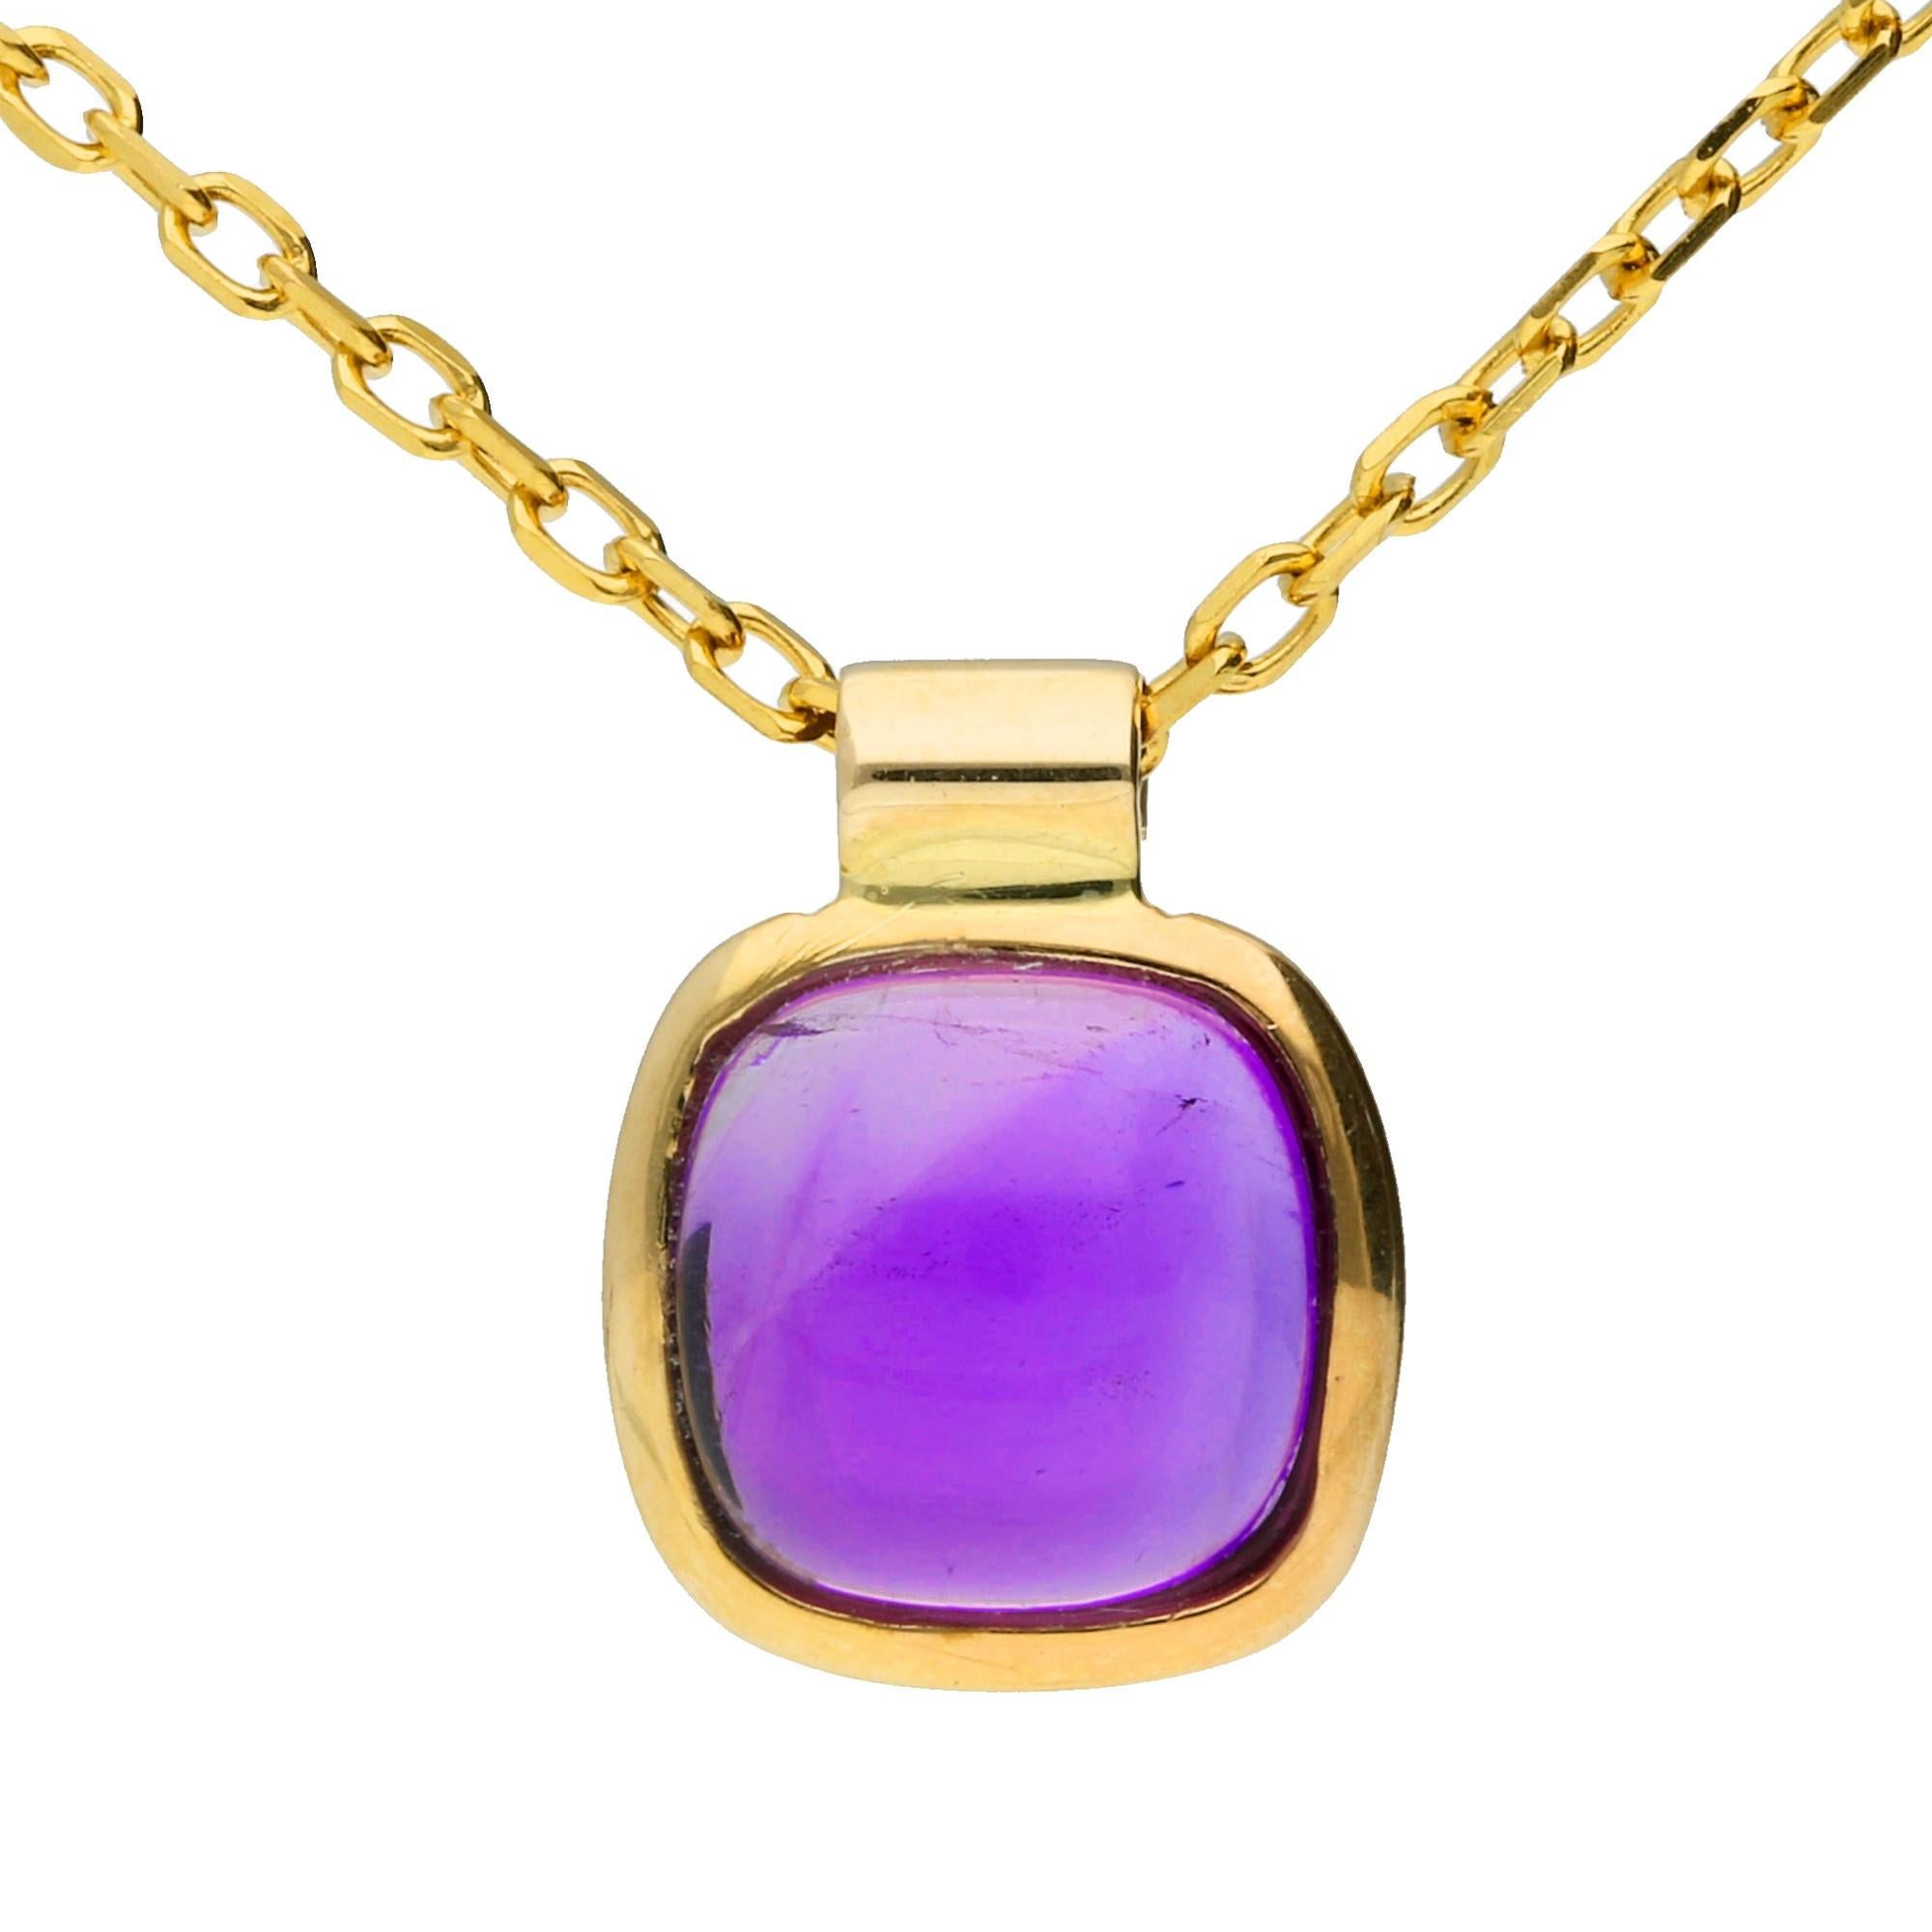 Add a splash of colour and elegance to your jewellery box, with this gorgeous amethyst jewellery set. Amethyst is the birthstone for February, making this the perfect birthday treat.

Both the pendant and earrings feature a beautiful round shape